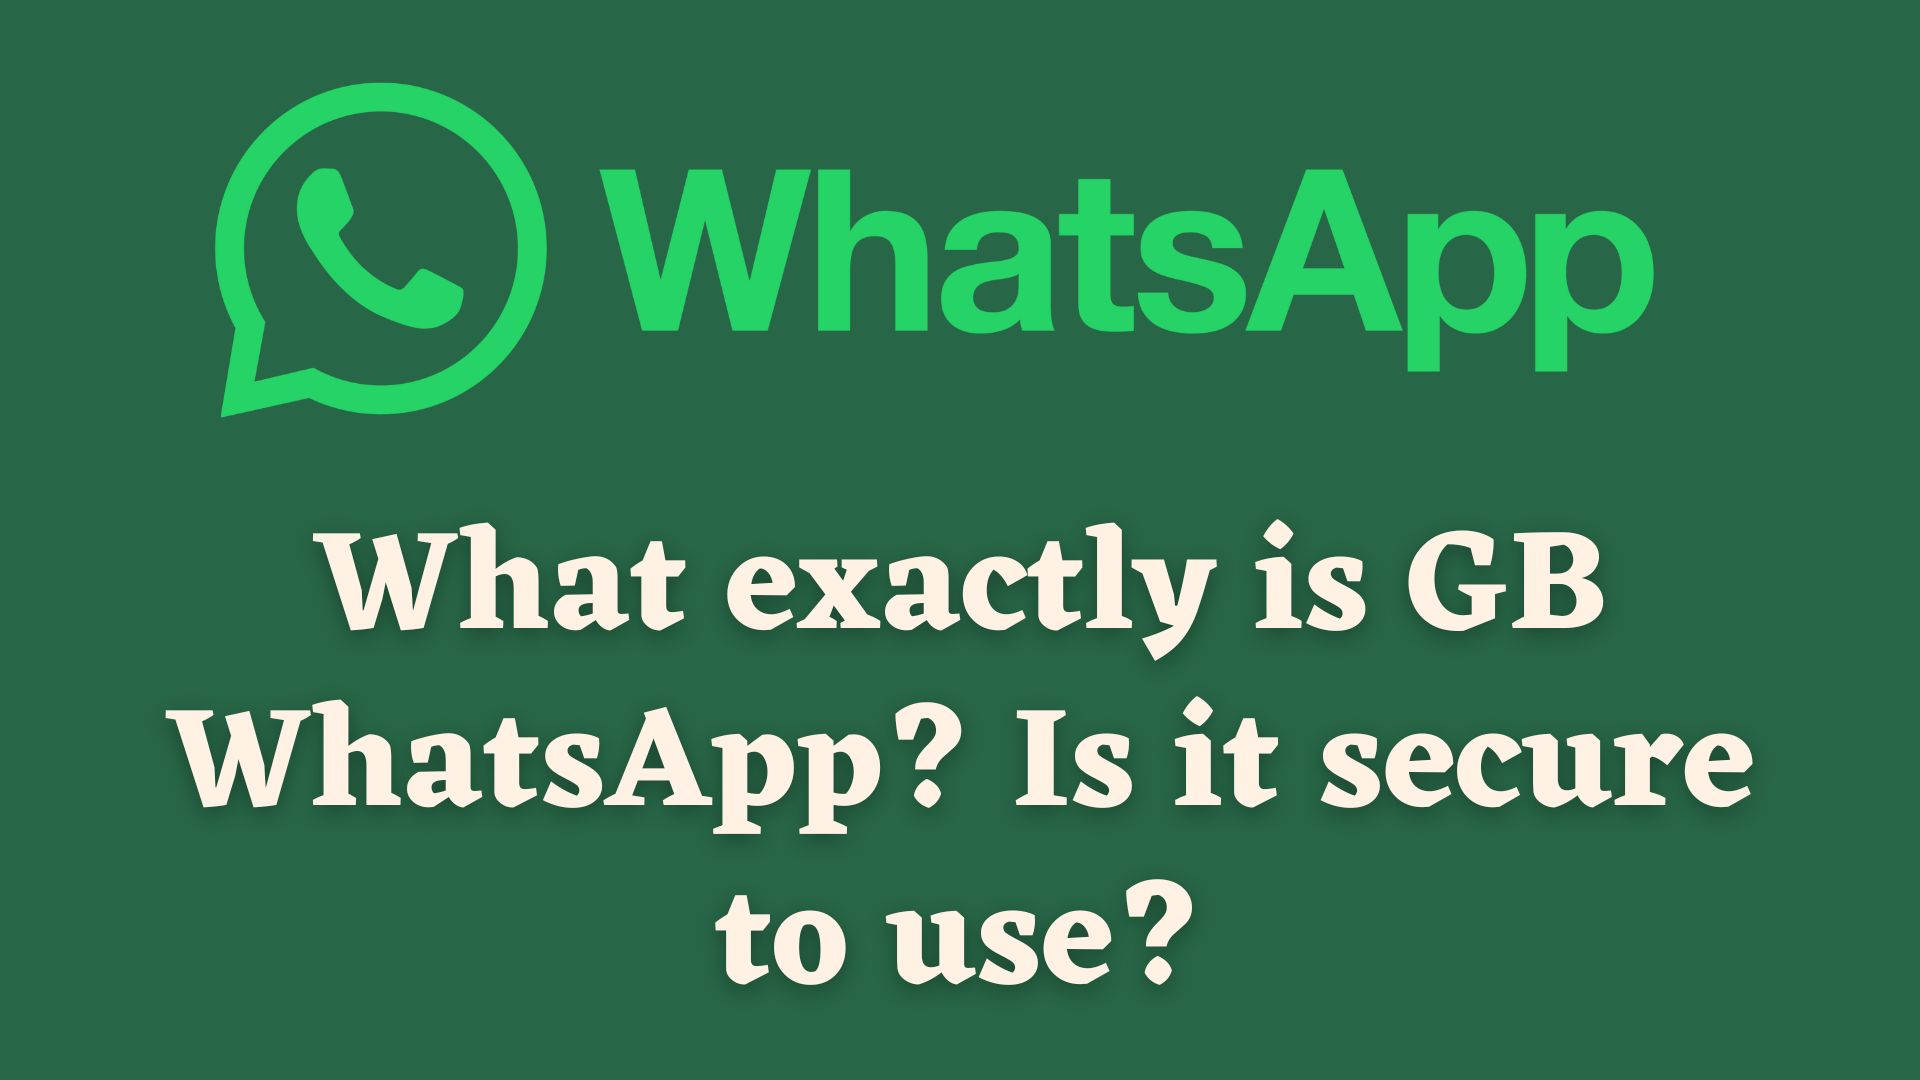 gbwhatsapp-is-it-secure-to-use